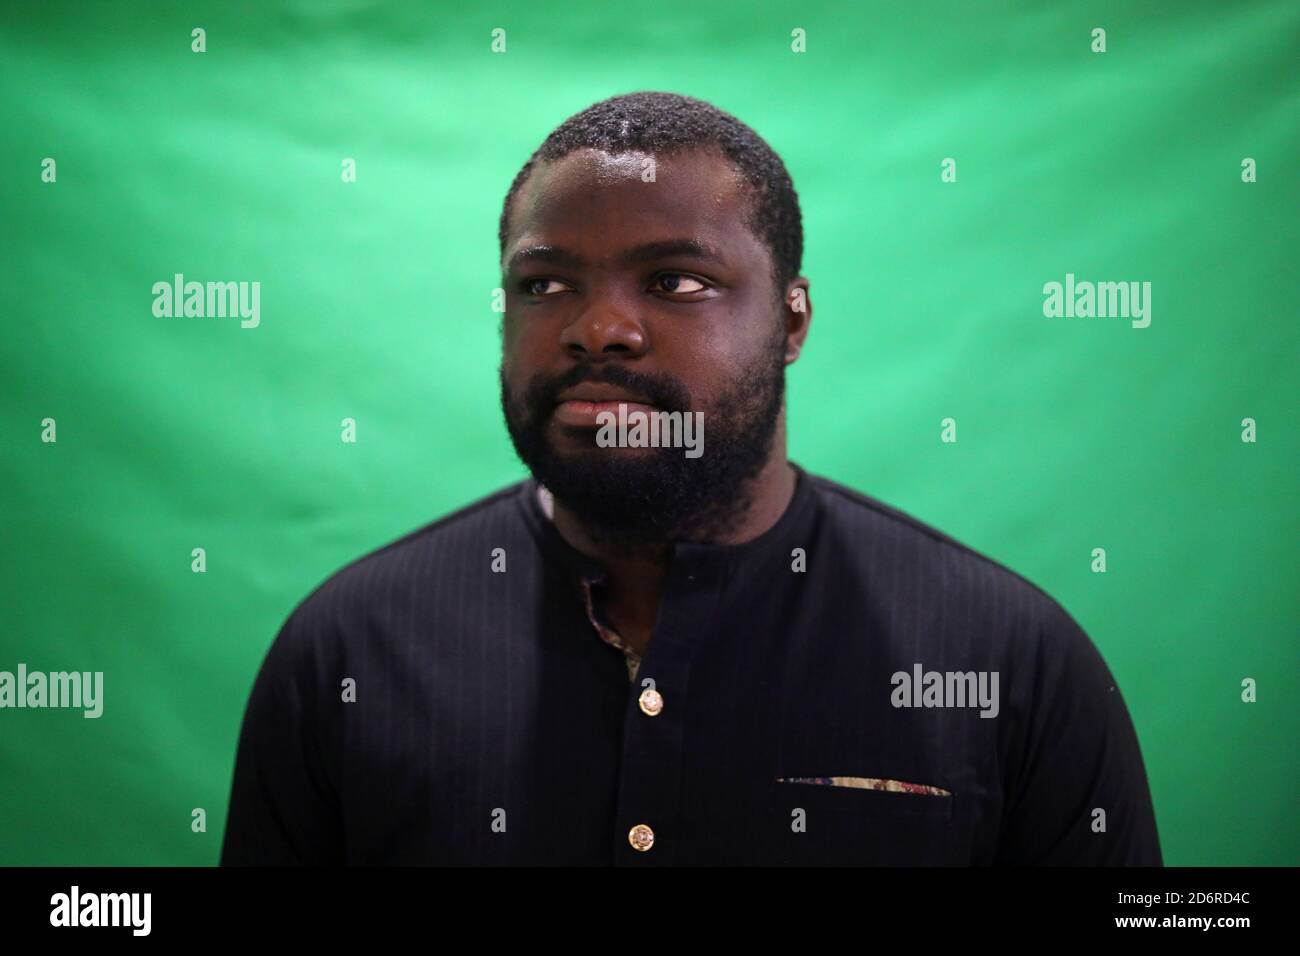 Iyinoluwa Aboyeji, co-founder of tech firm Andela, attends an interview  with Reuters amid protests over police brutality in Lagos, Nigeria October  17, 2020. Picture taken October 17, 2020. REUTERS/Temilade Stock Photo -  Alamy